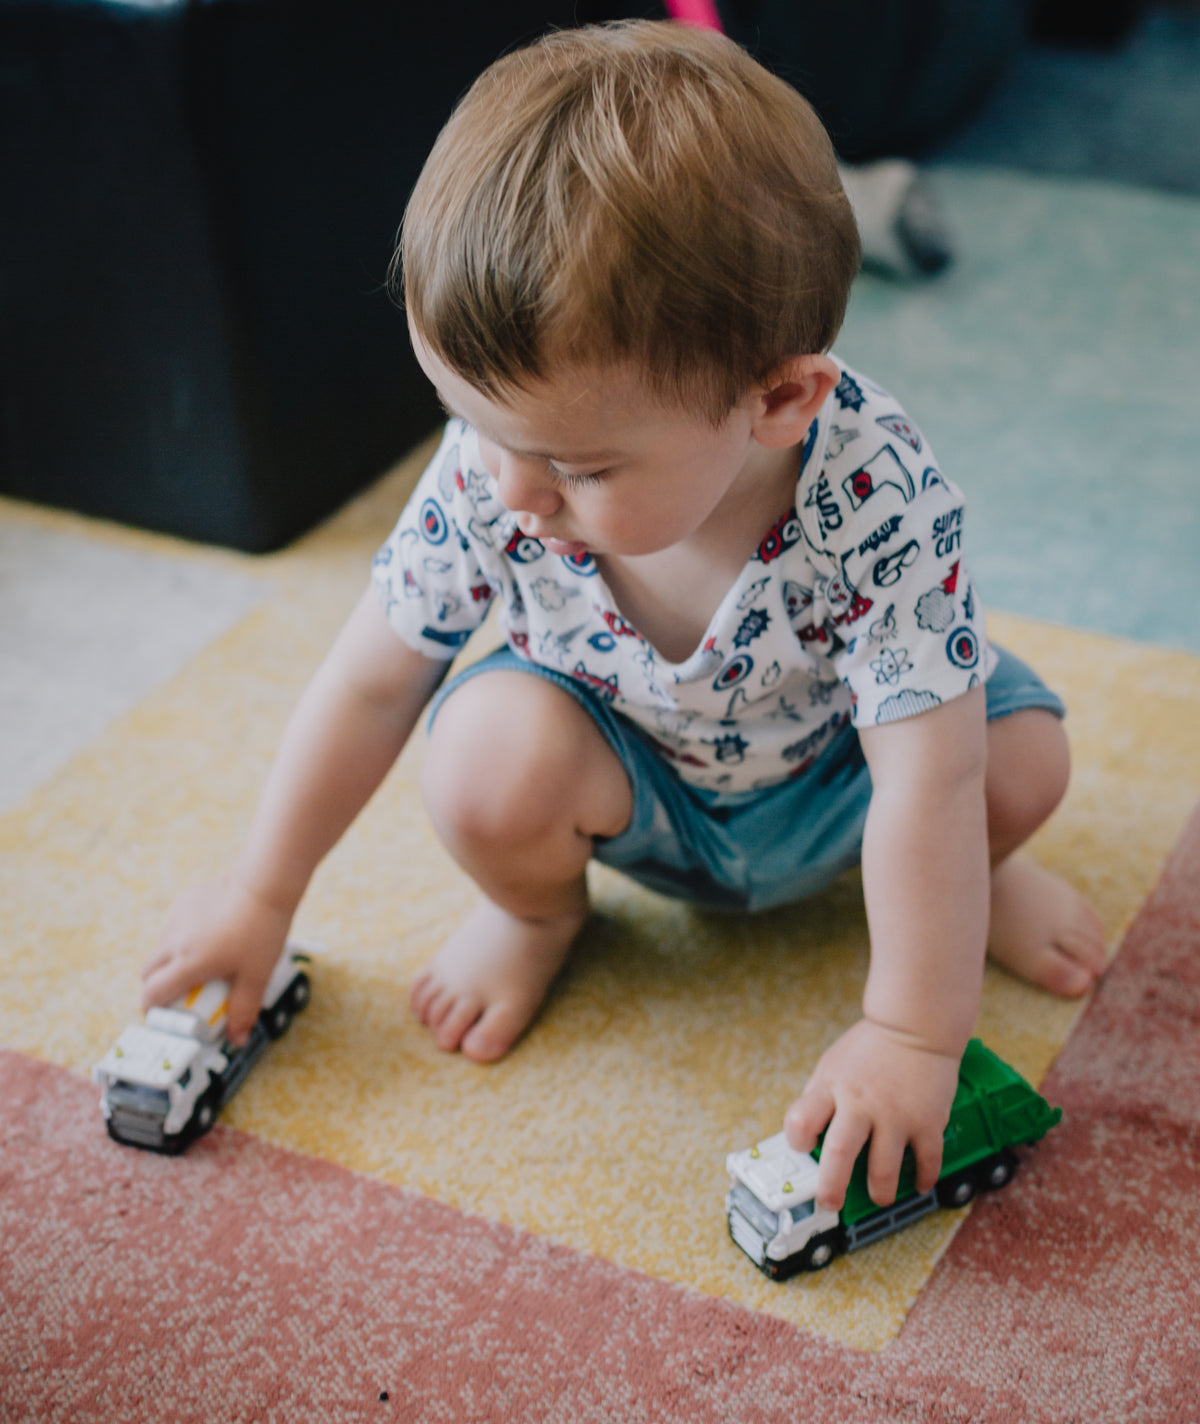 small child squats and plays with toy trucks